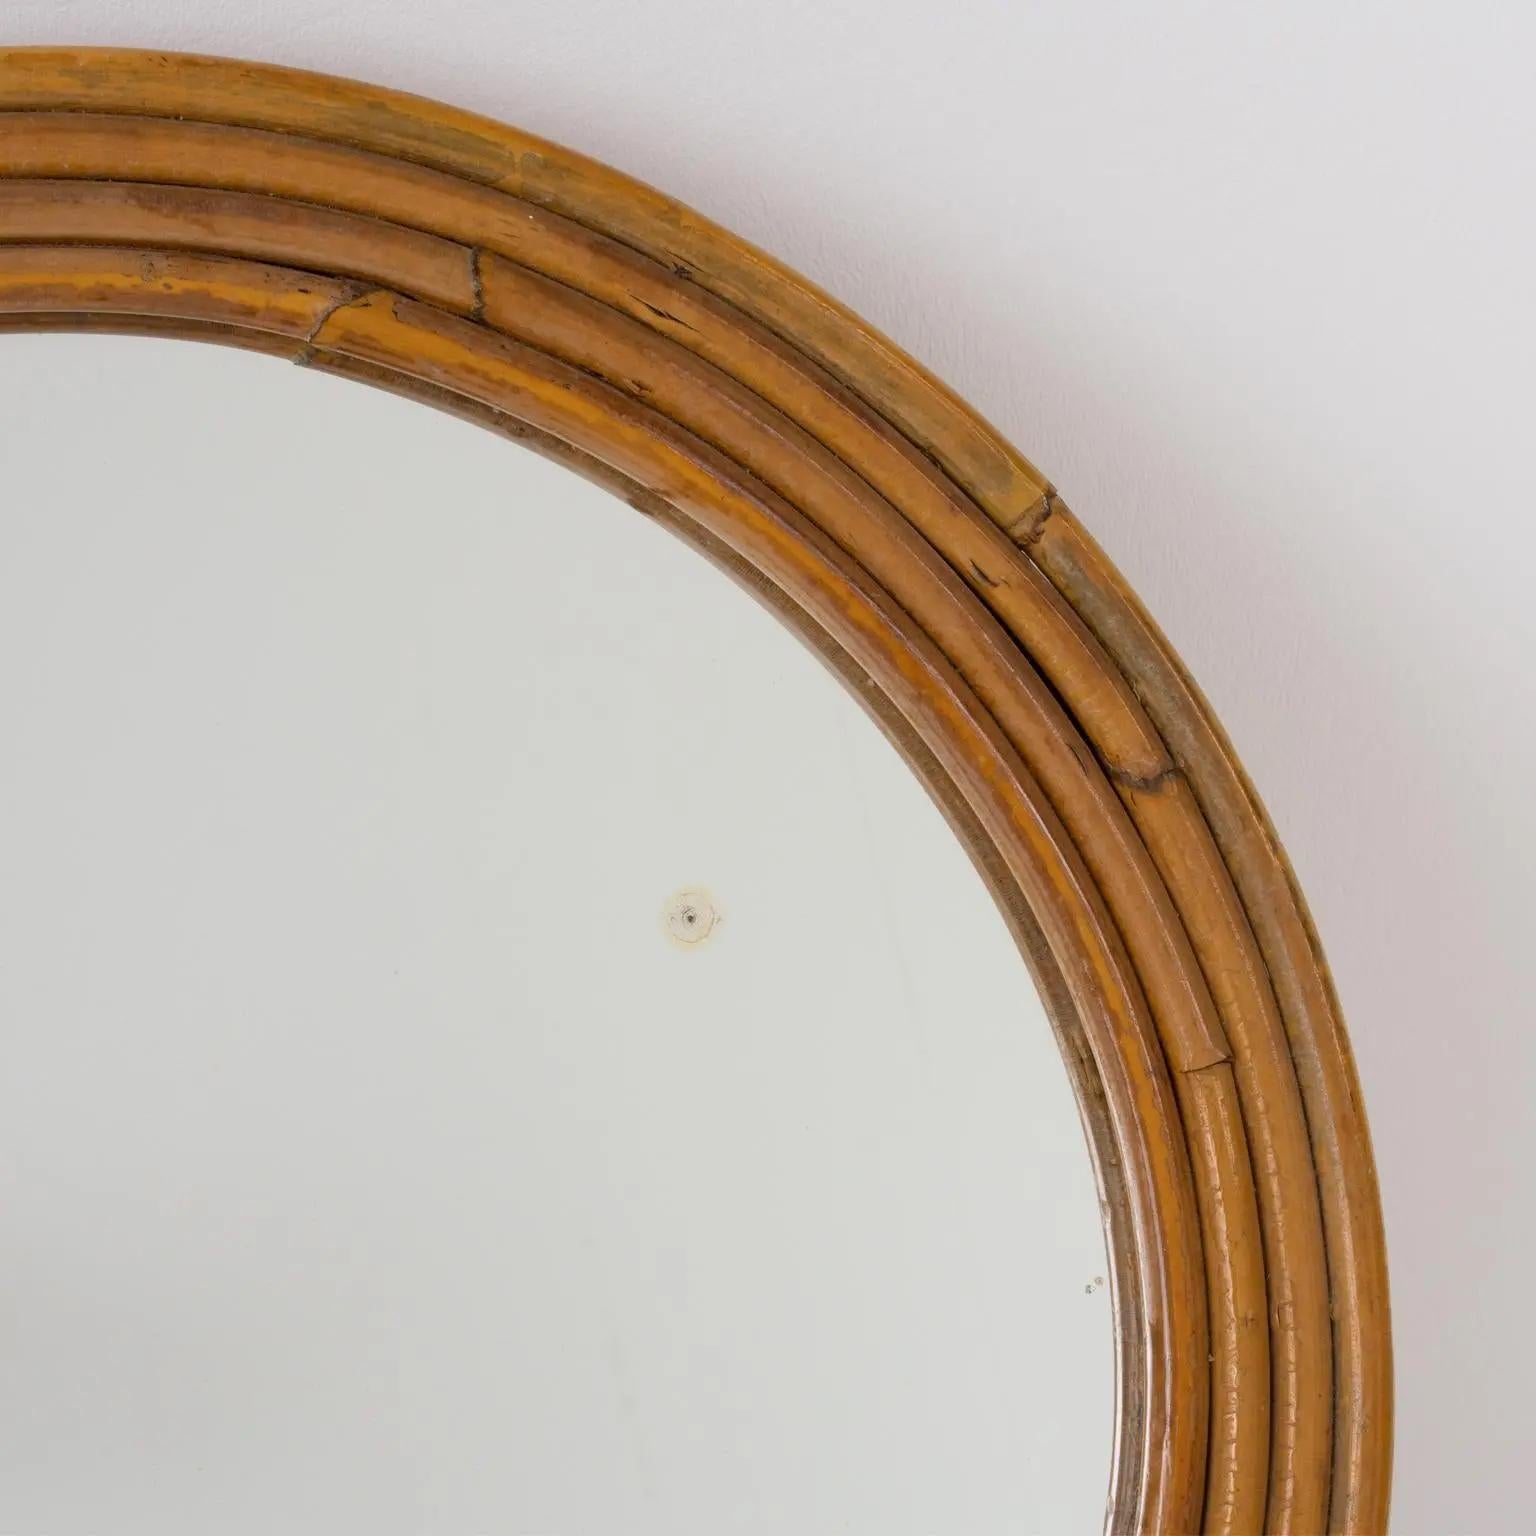 Pencil Reed Rattan Bamboo Table Mirror, Italy 1960s For Sale 3